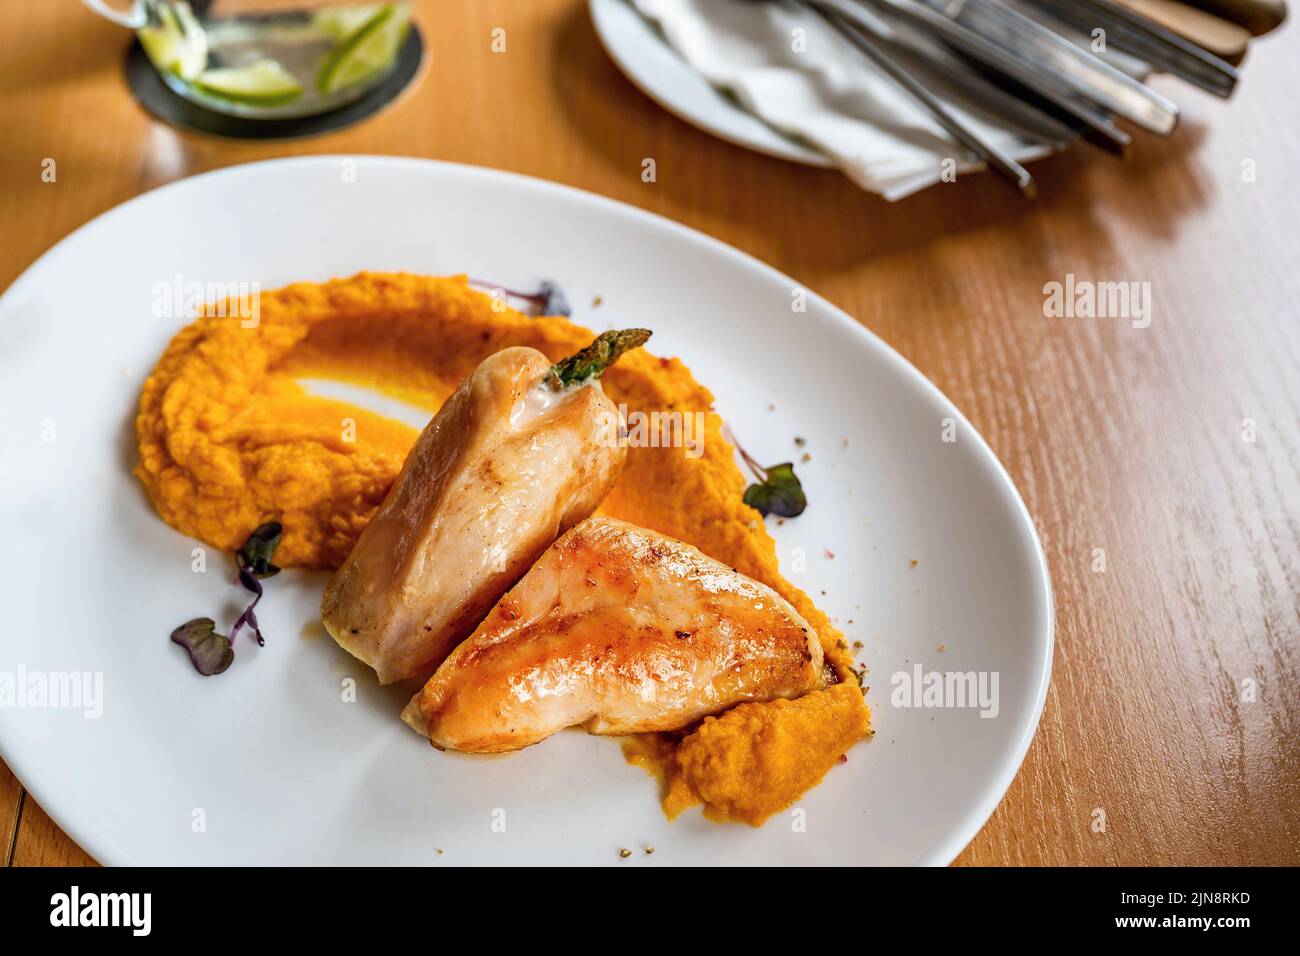 Roasted turkey meat with mashed pumpkin, cutlery and glass on table, closeup. Stock Photo